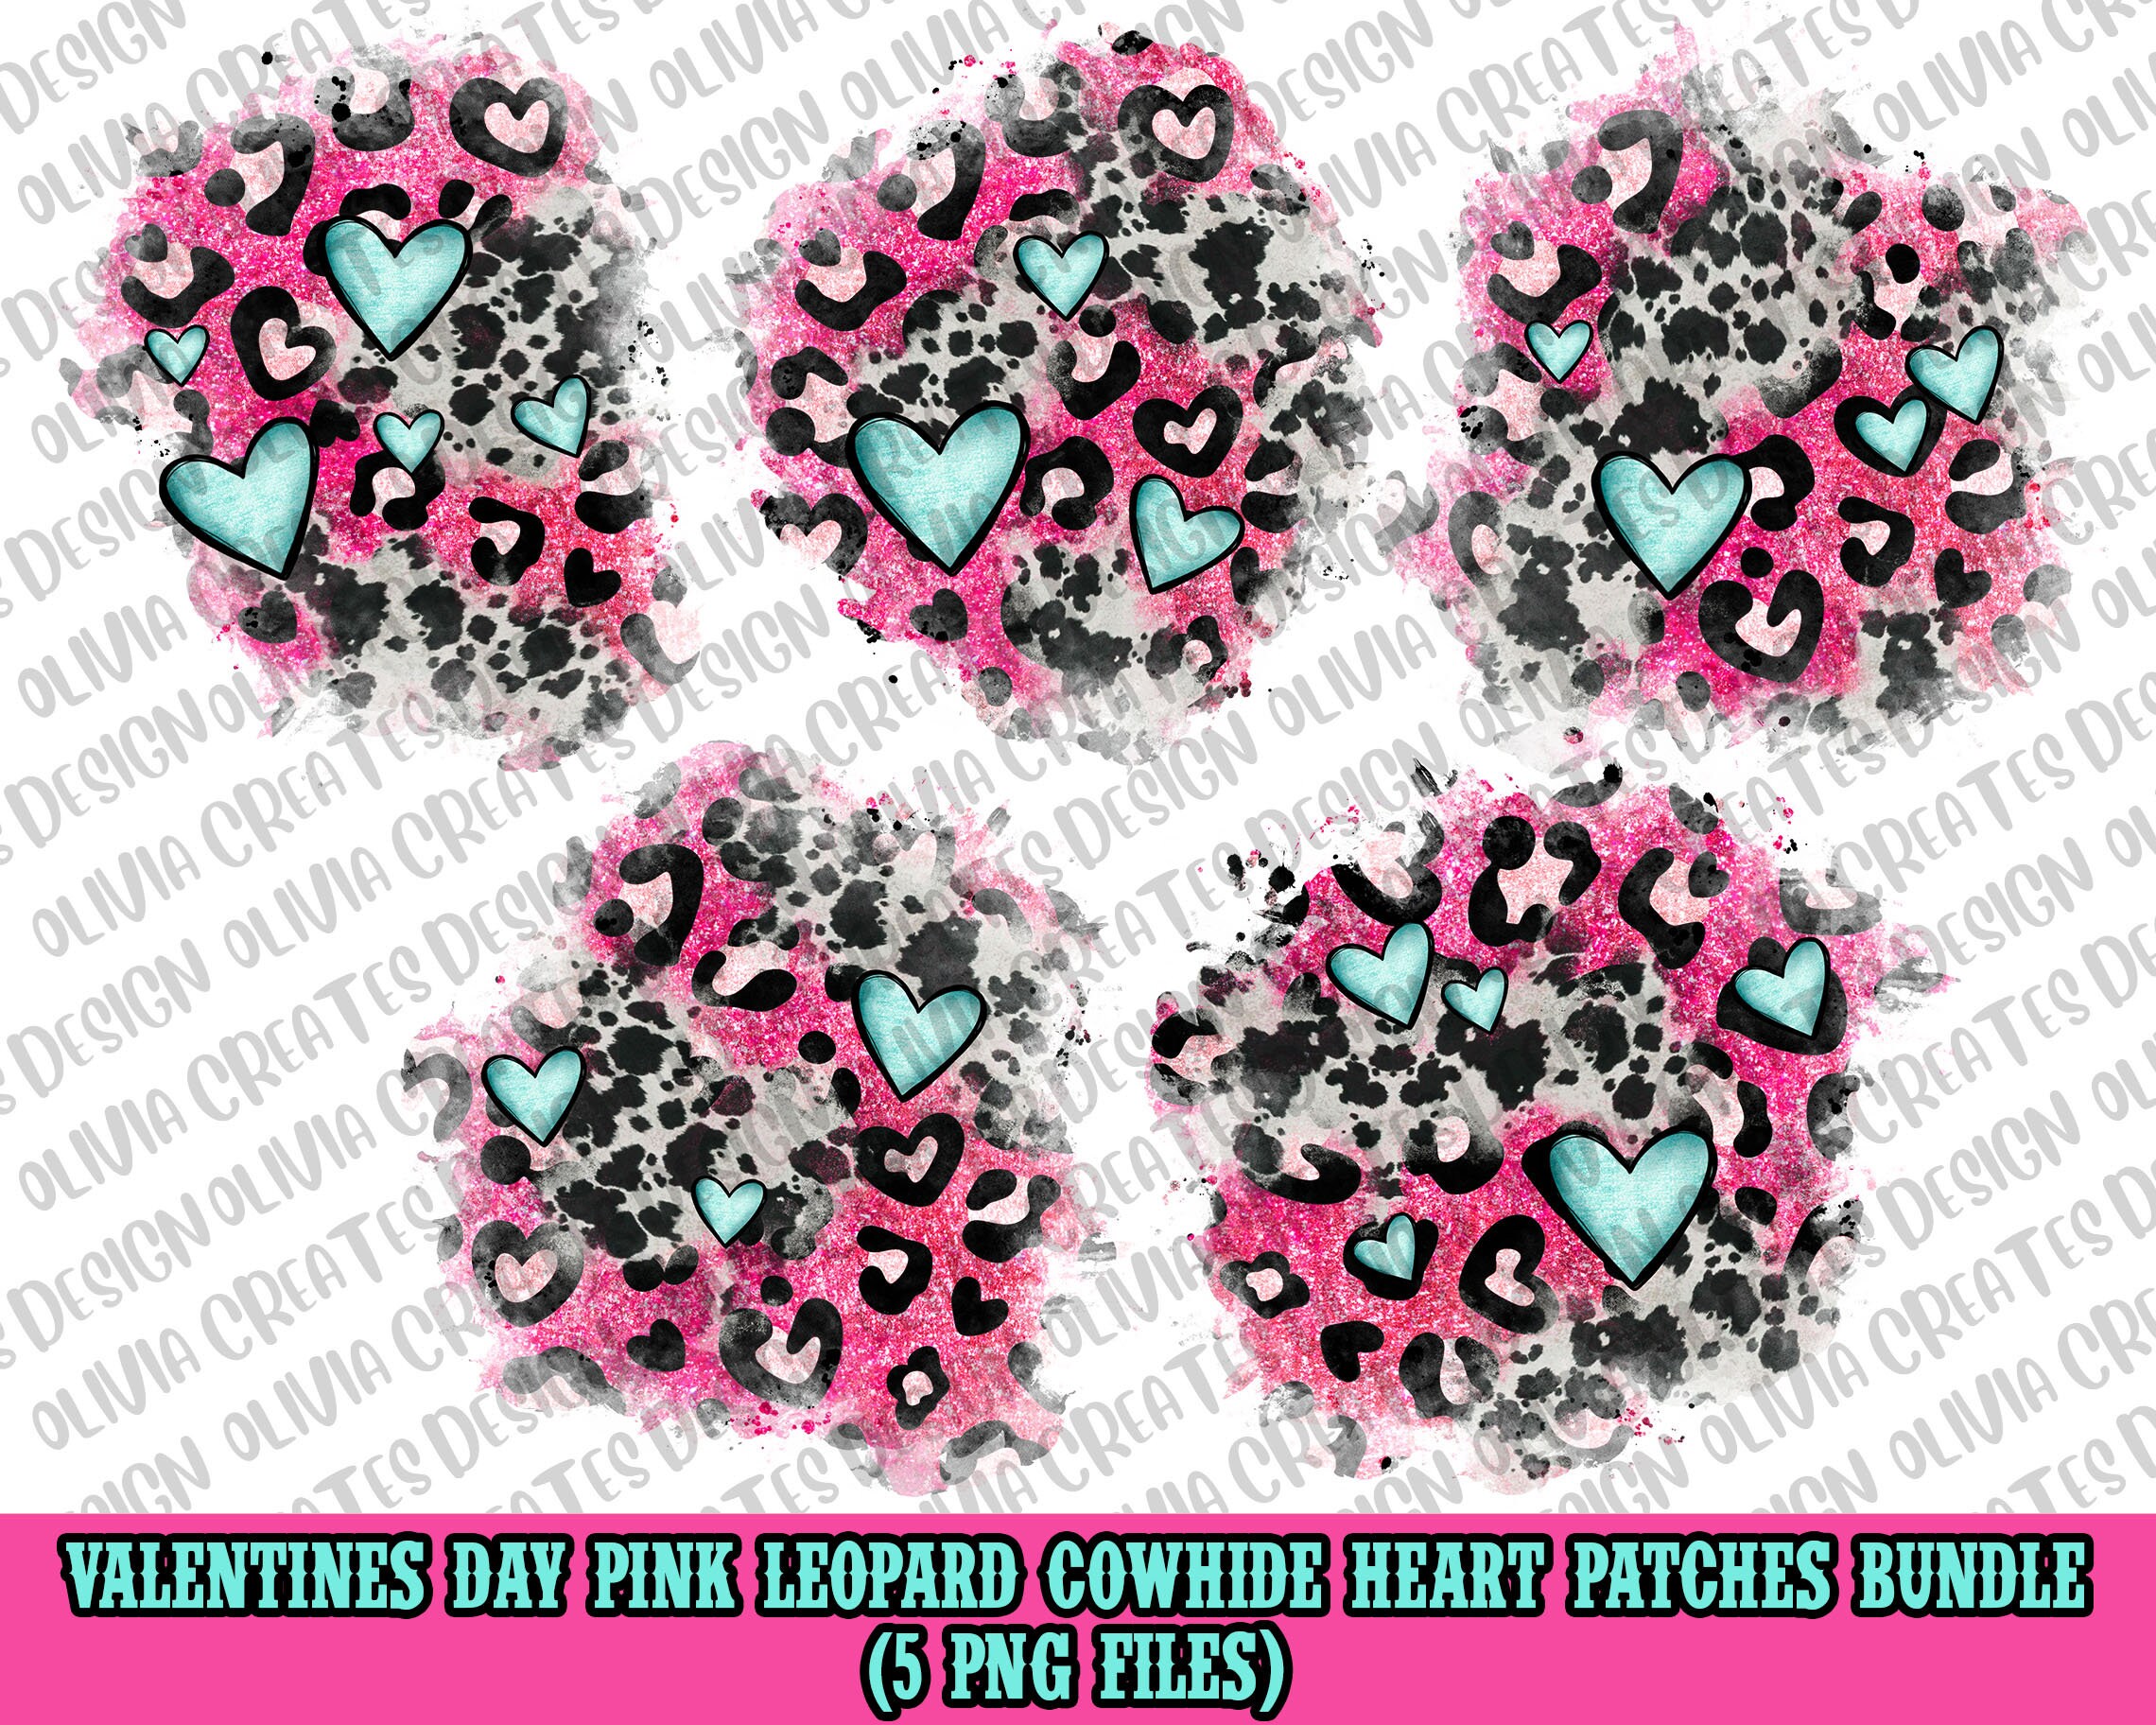 New Colors & Shapes: 4 HEART, Sublimation Patch Blanks, Paper Backed,  Sew-on or Glue-on Print Patches for Jackets, Clothes, Hats, Memorials 